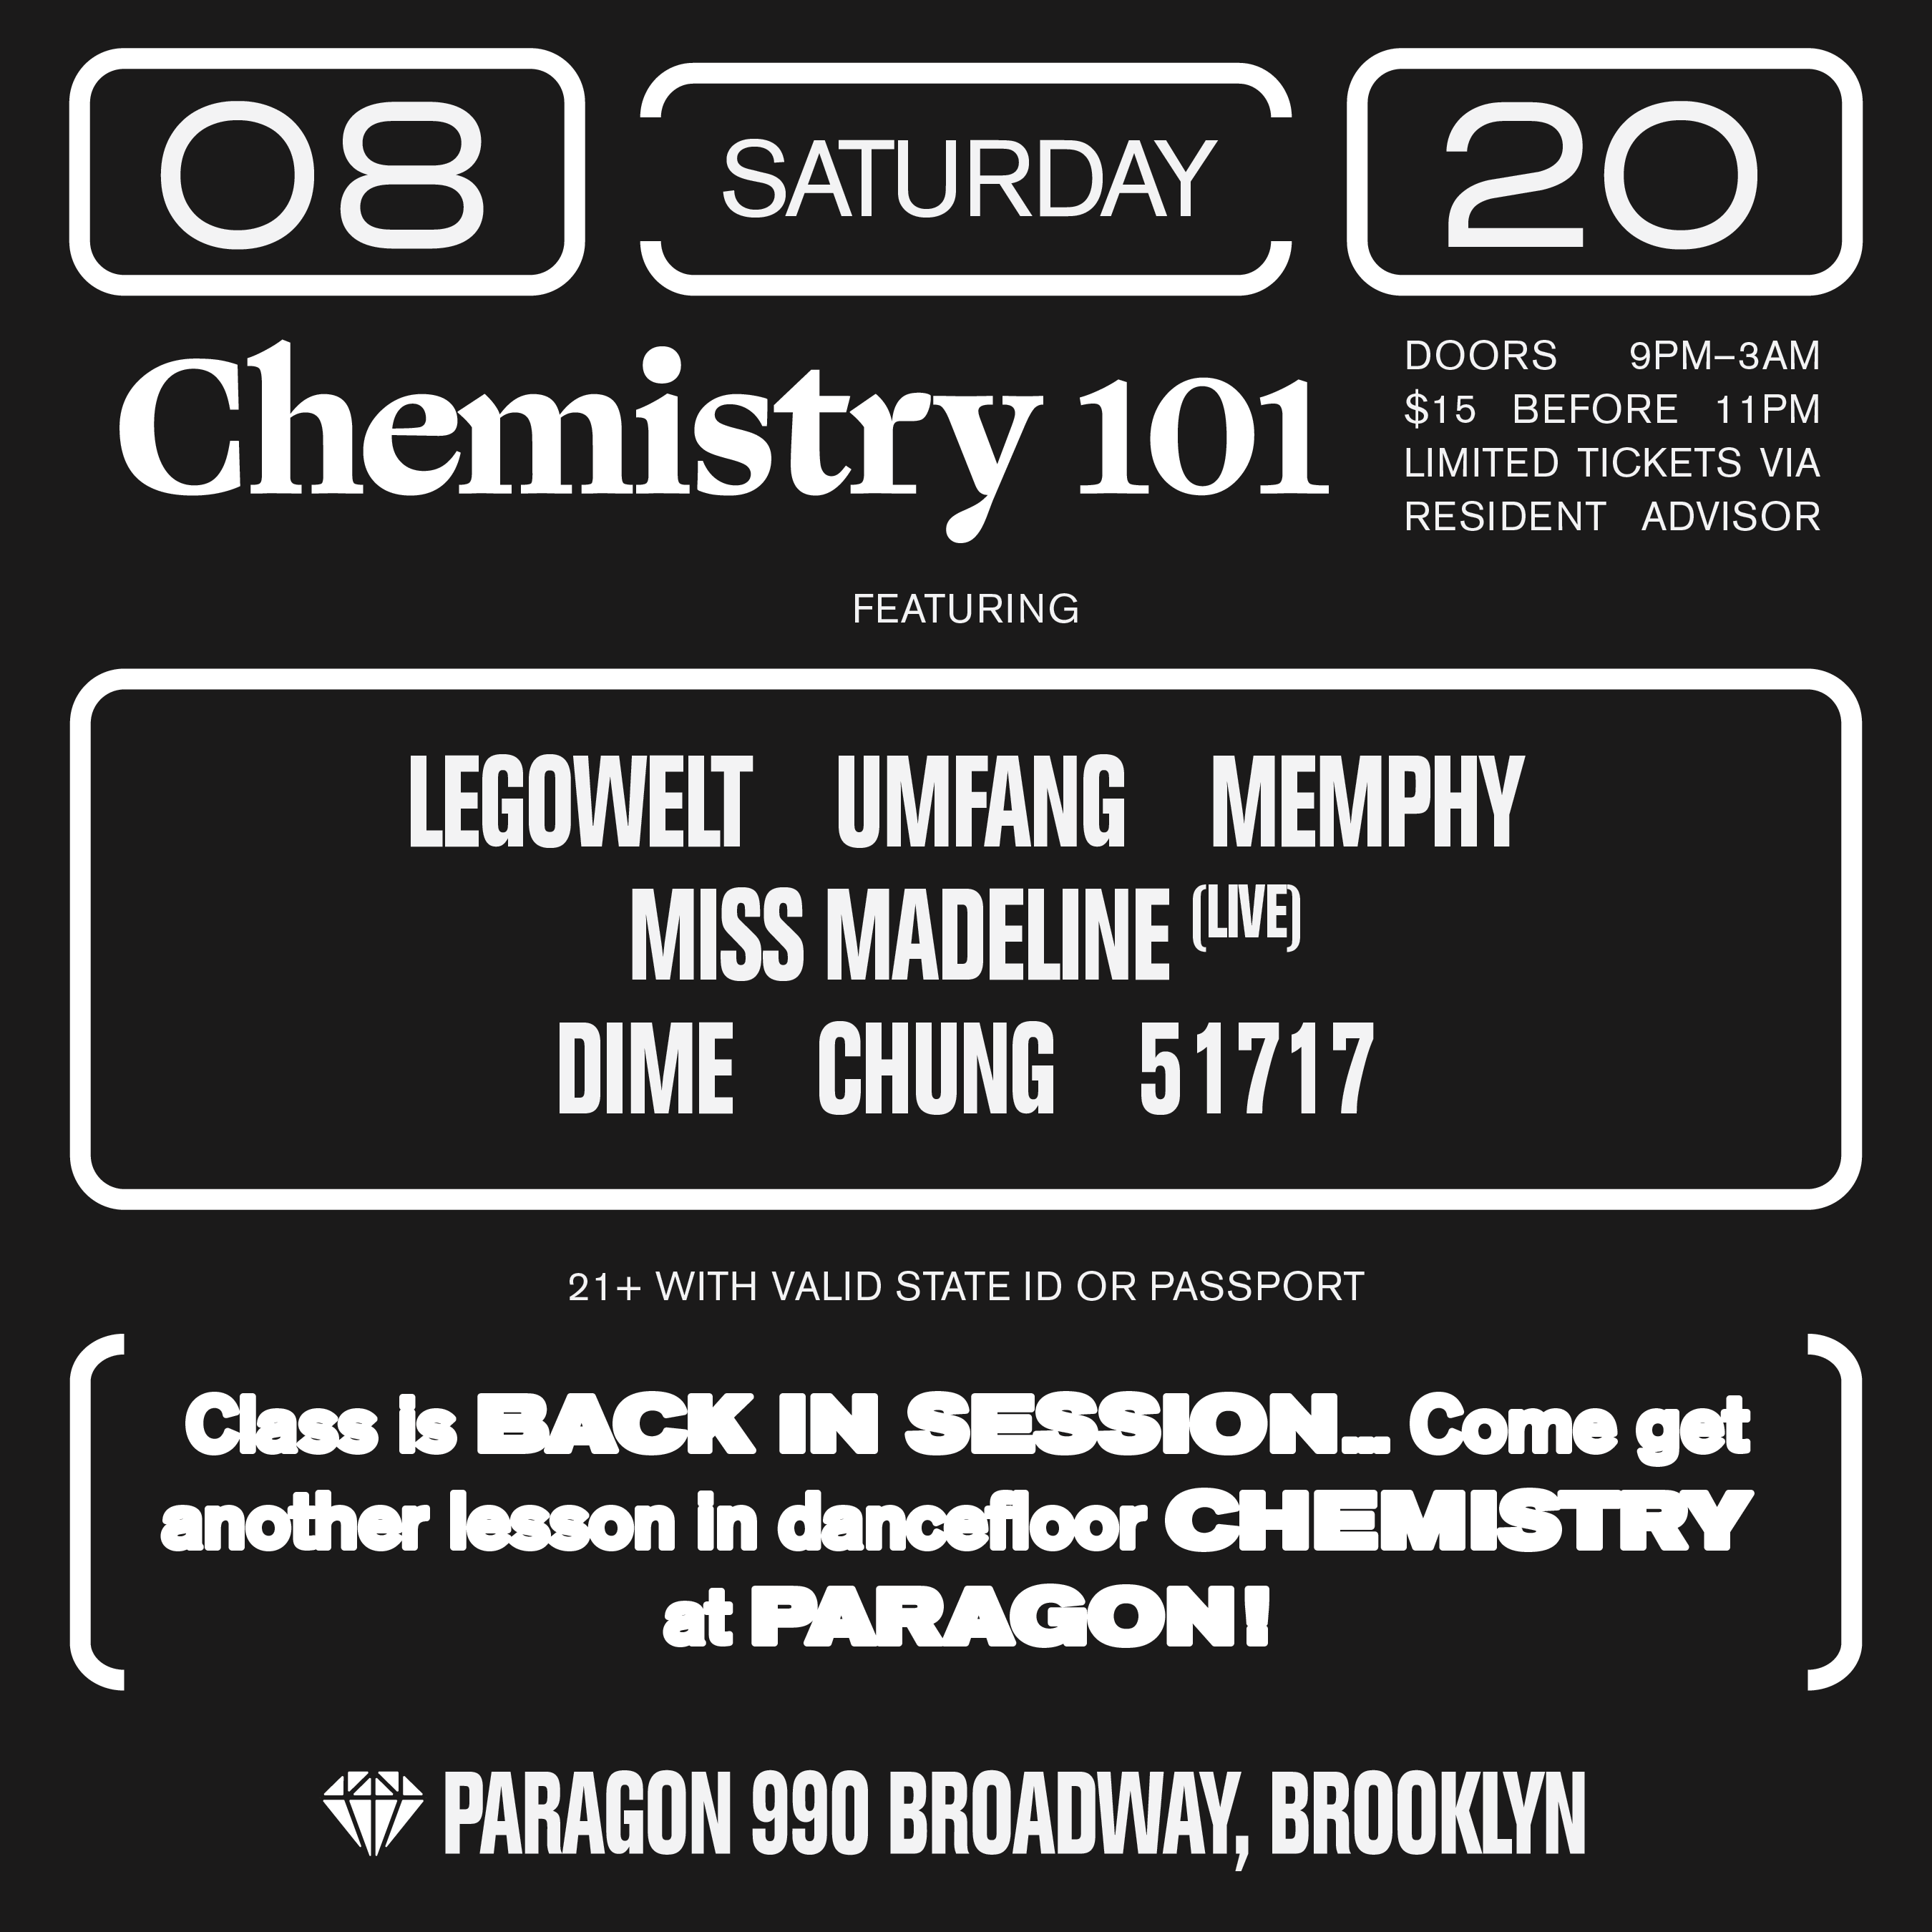 Chemistry 101 with Legowelt Umfang Memphy Miss Madeline (Live) Dime Chung 51717 - Flyer front